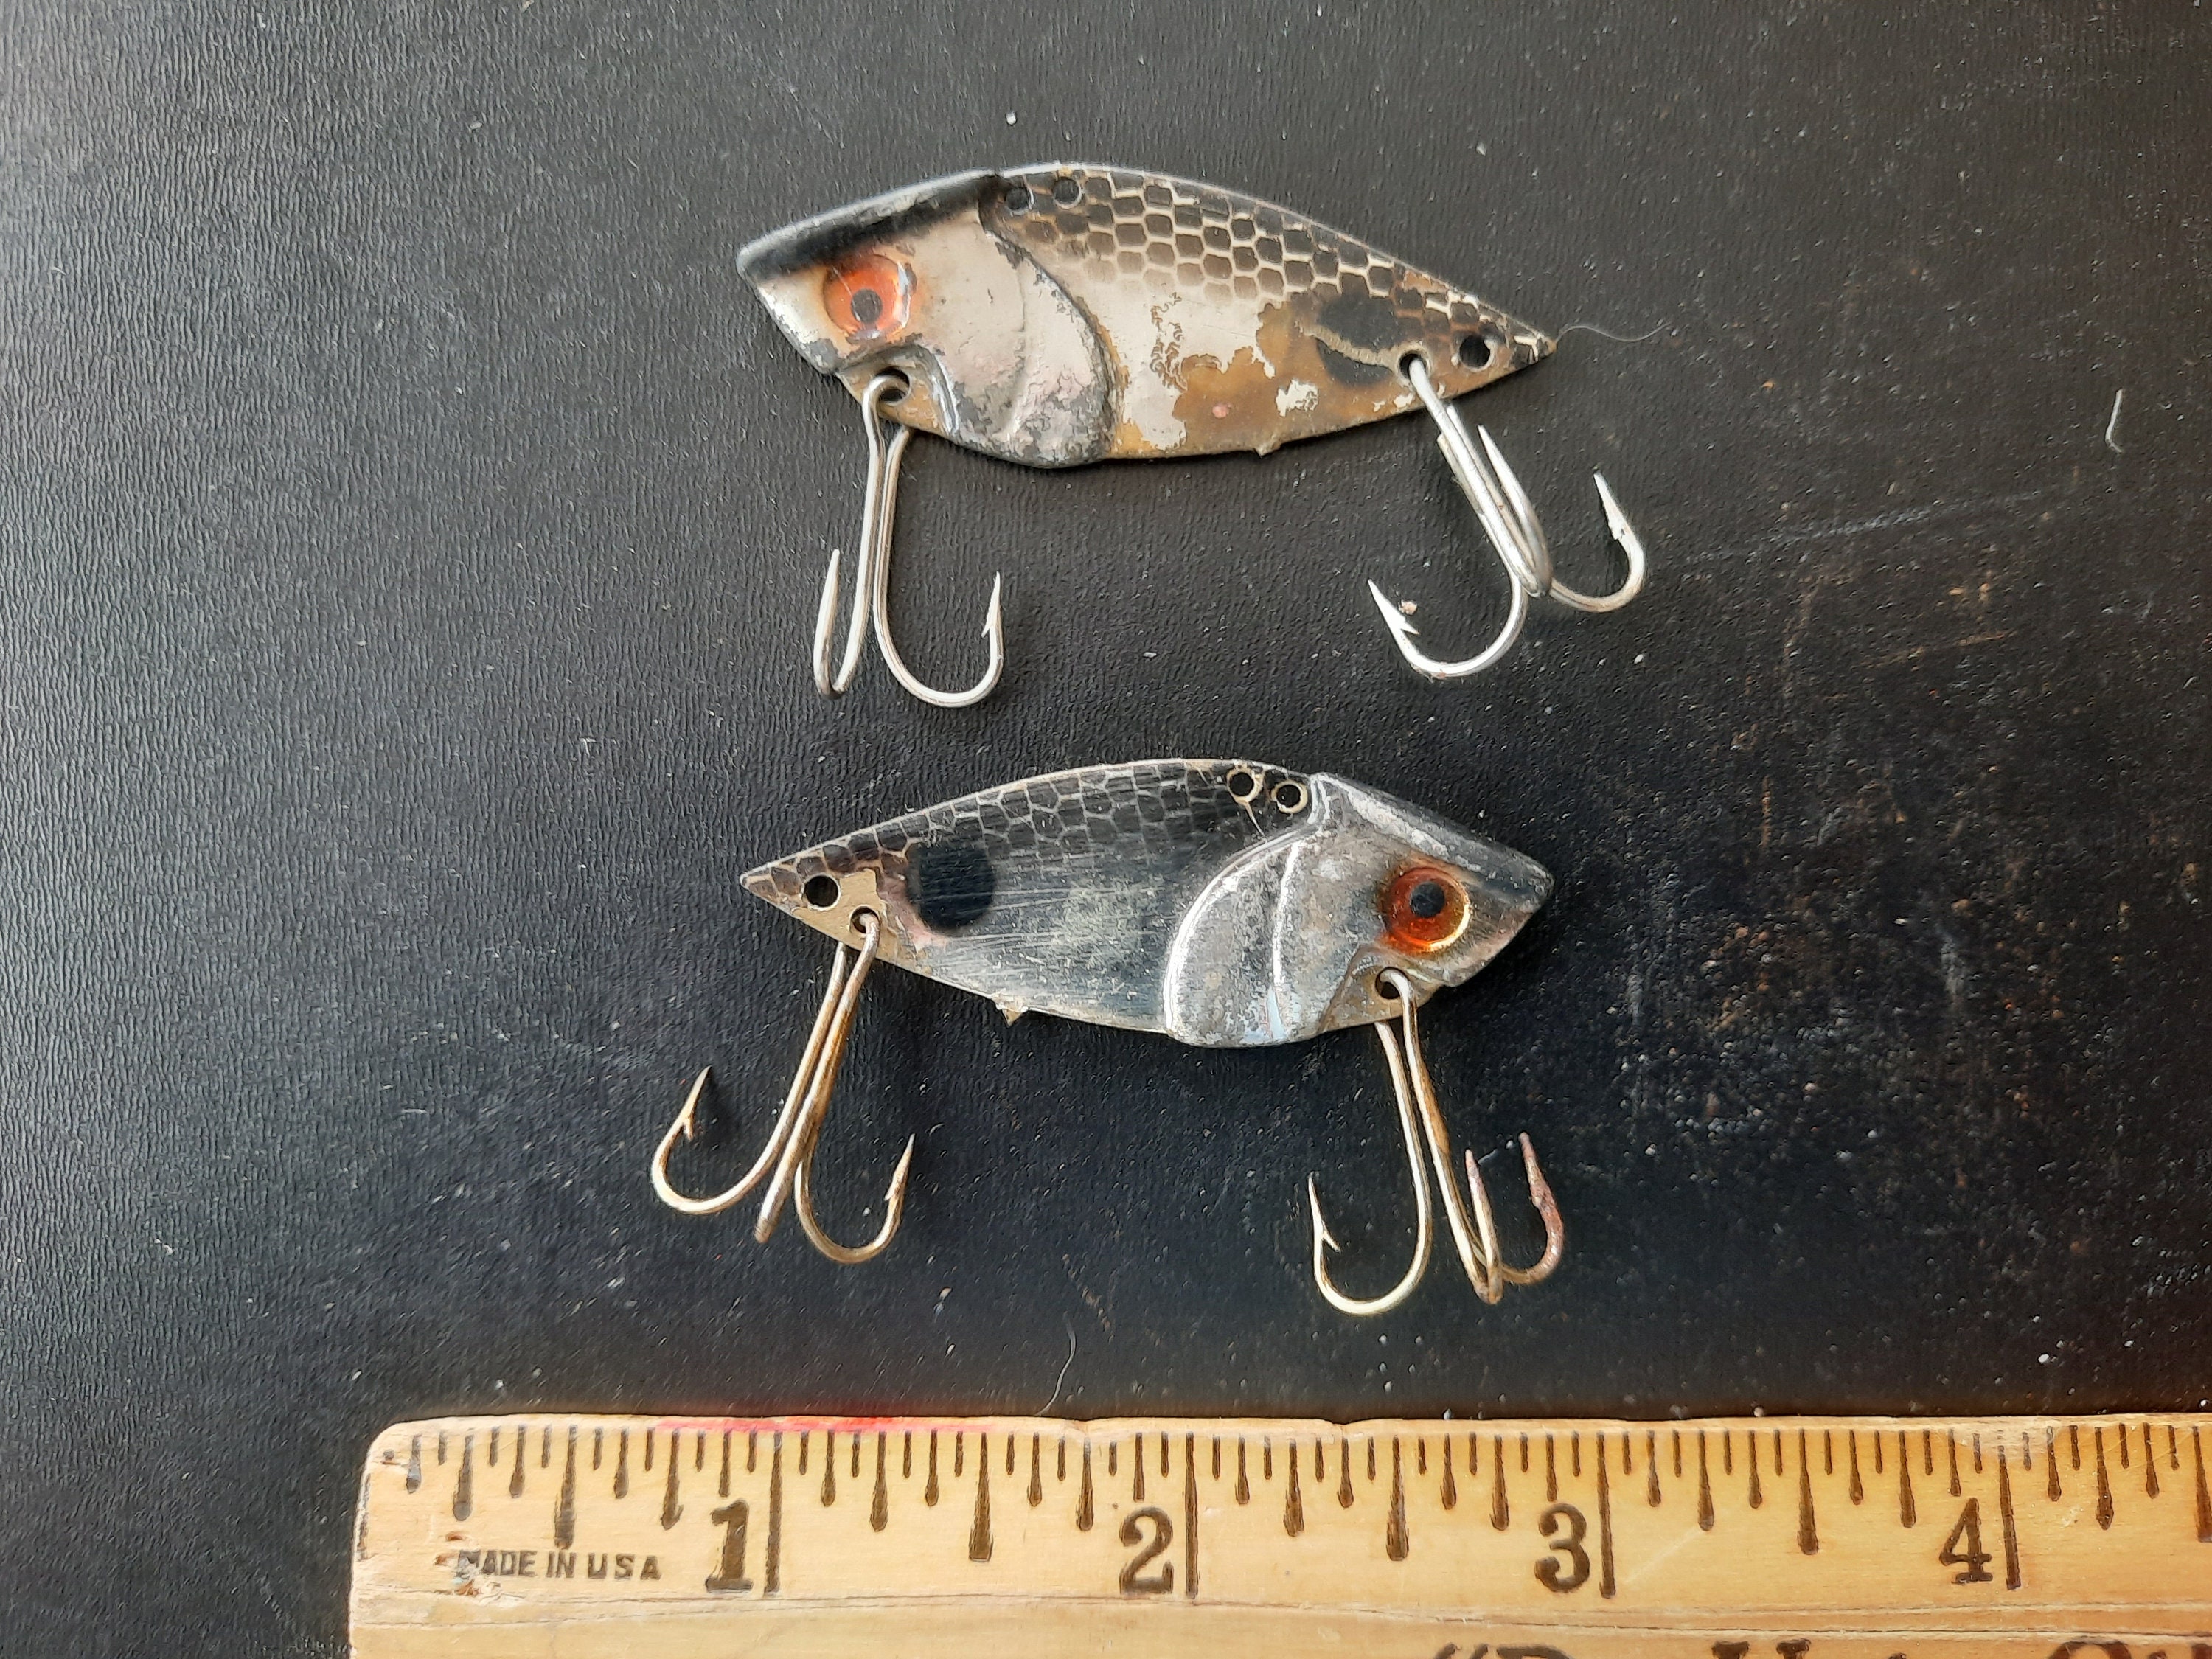 Vintage 1980s Lure Lot of 2 : Pair of Natural Shad Metal Sonic Style Fishing  Lures, 2, 5/16 Oz. Used 